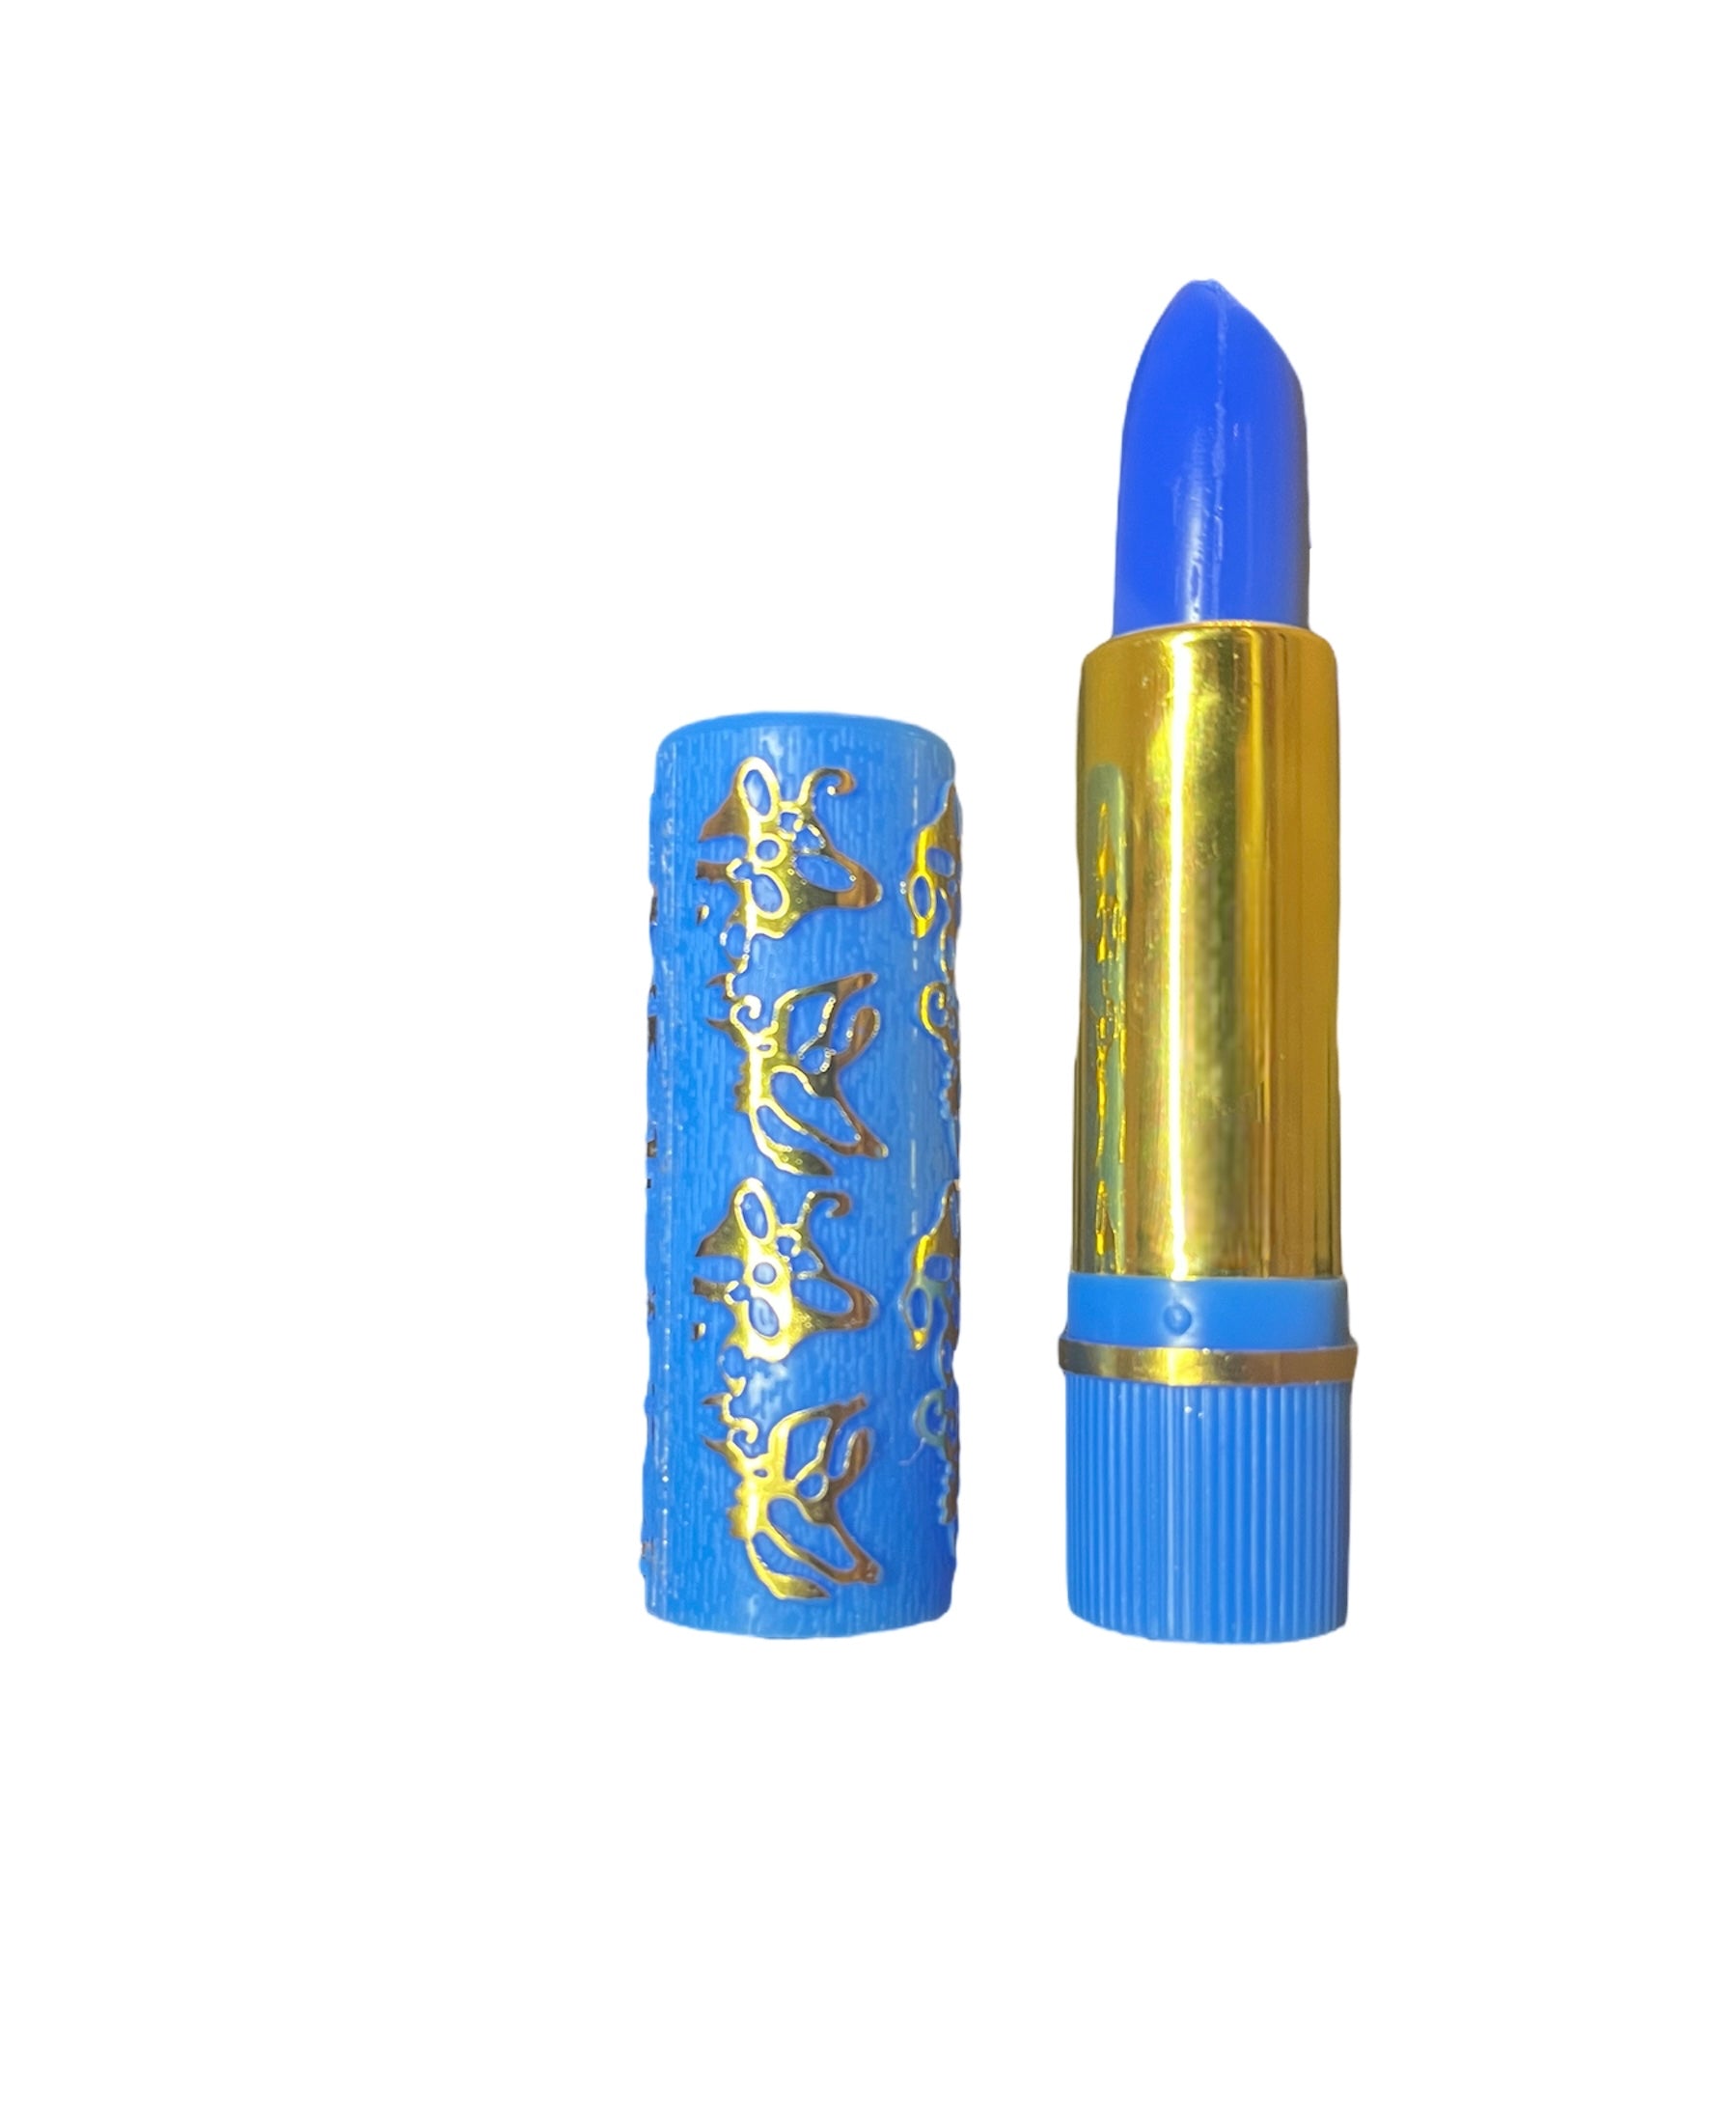 A colour changing lip stain from Morocco. This lipstick turns into a lovely pink shade.